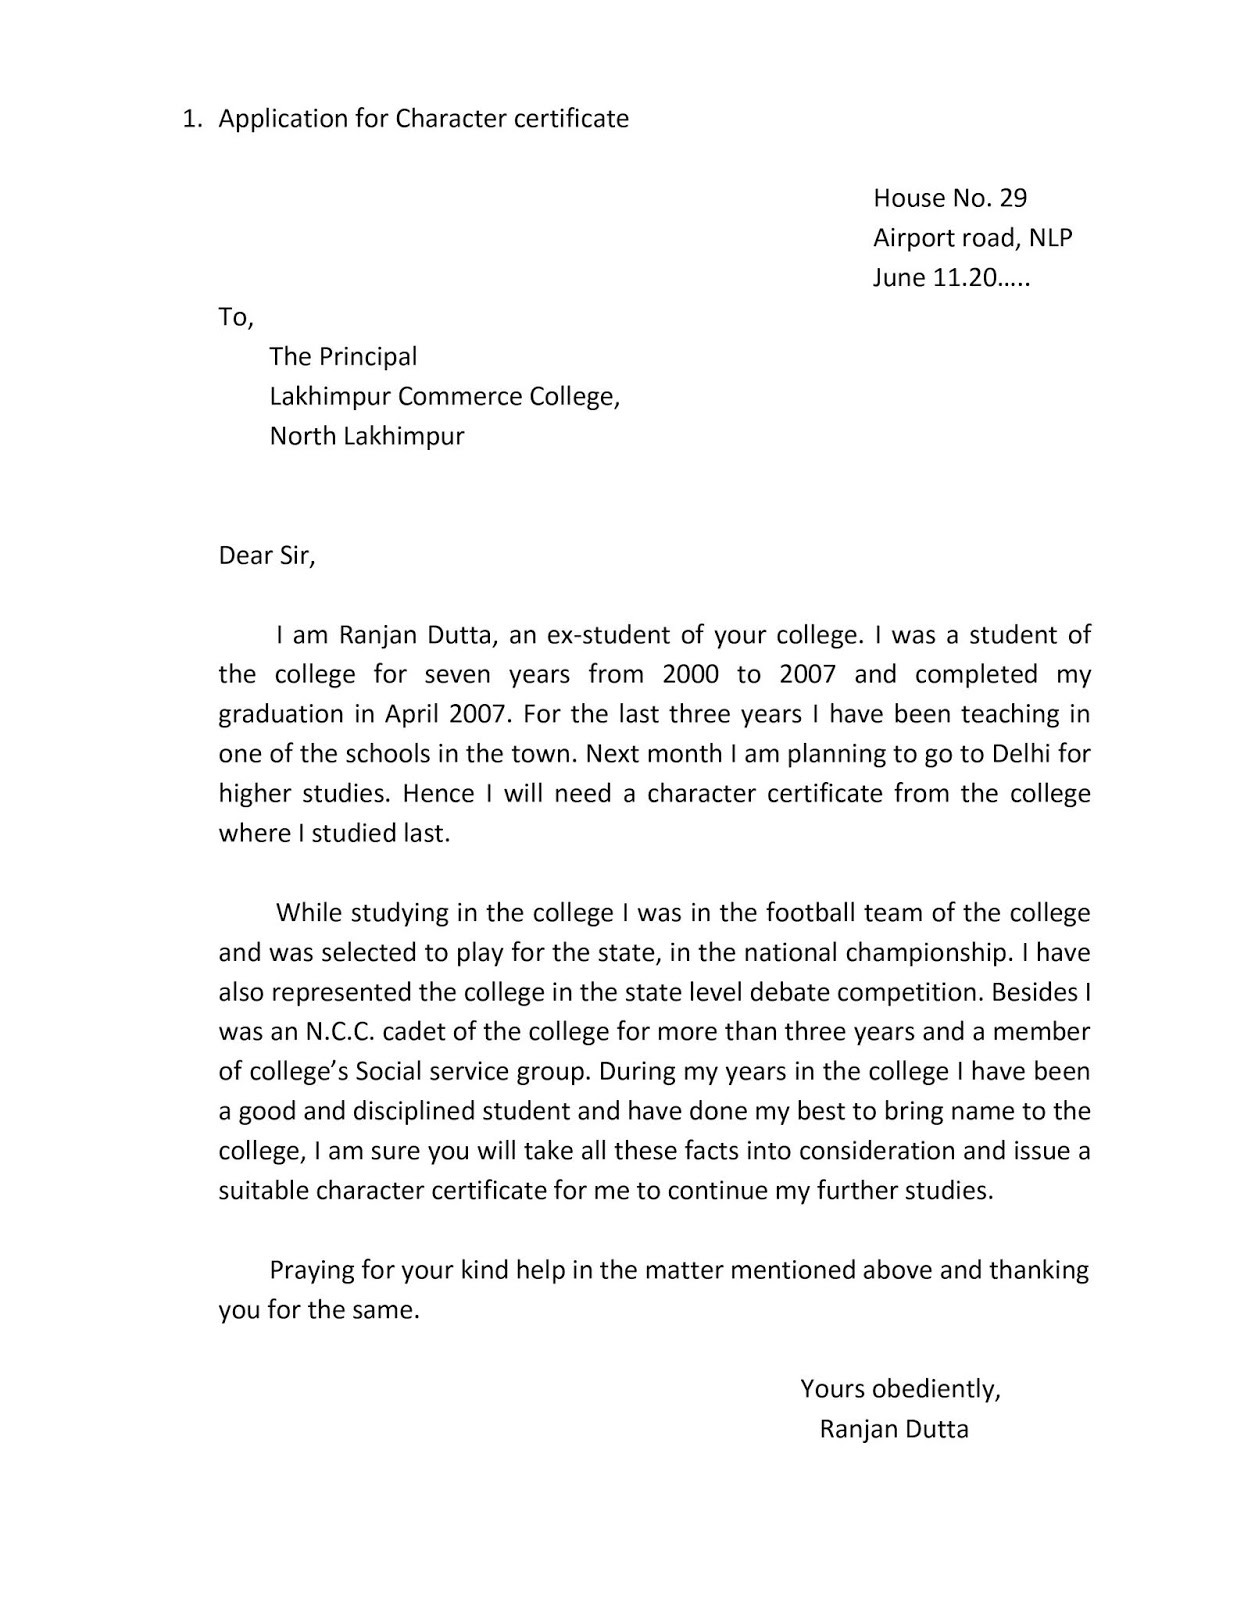 application letter for character certificate from college